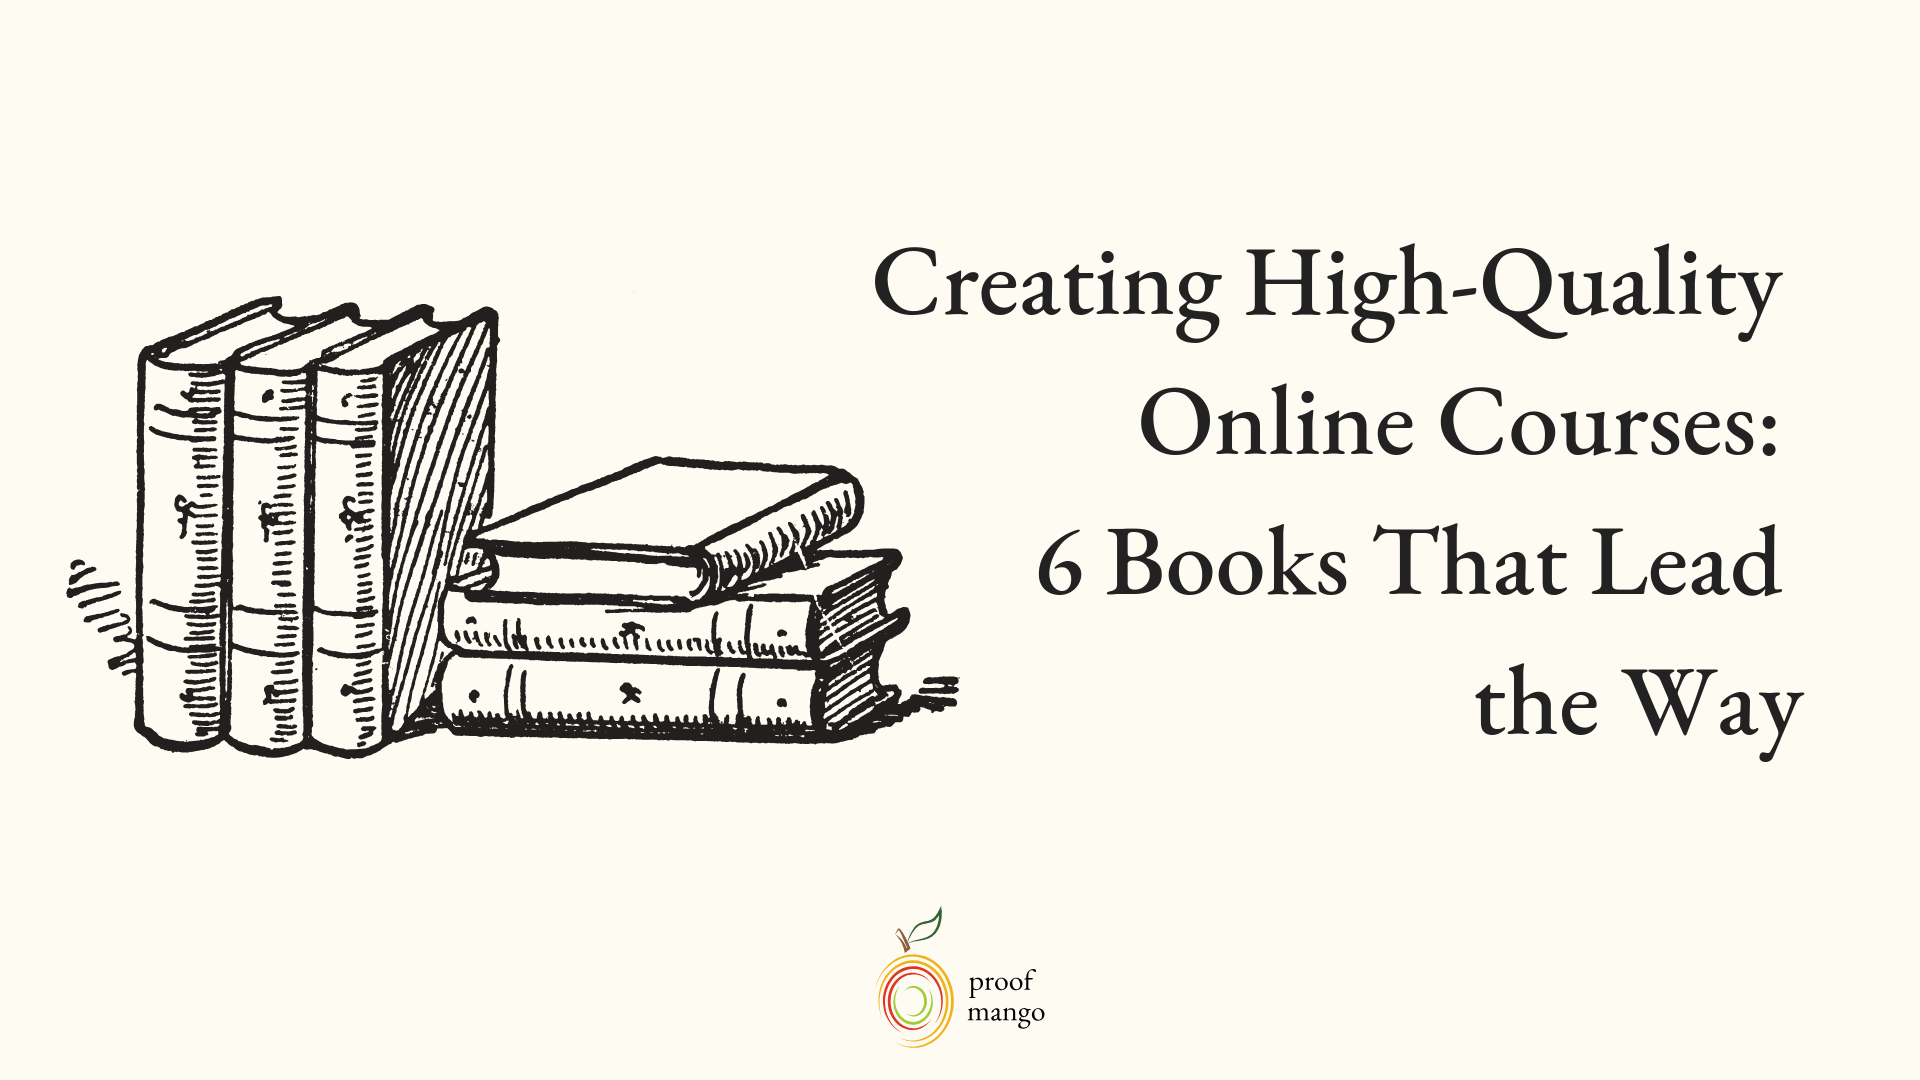 Creating High-Quality Online Courses – 6 Books That Lead the Way